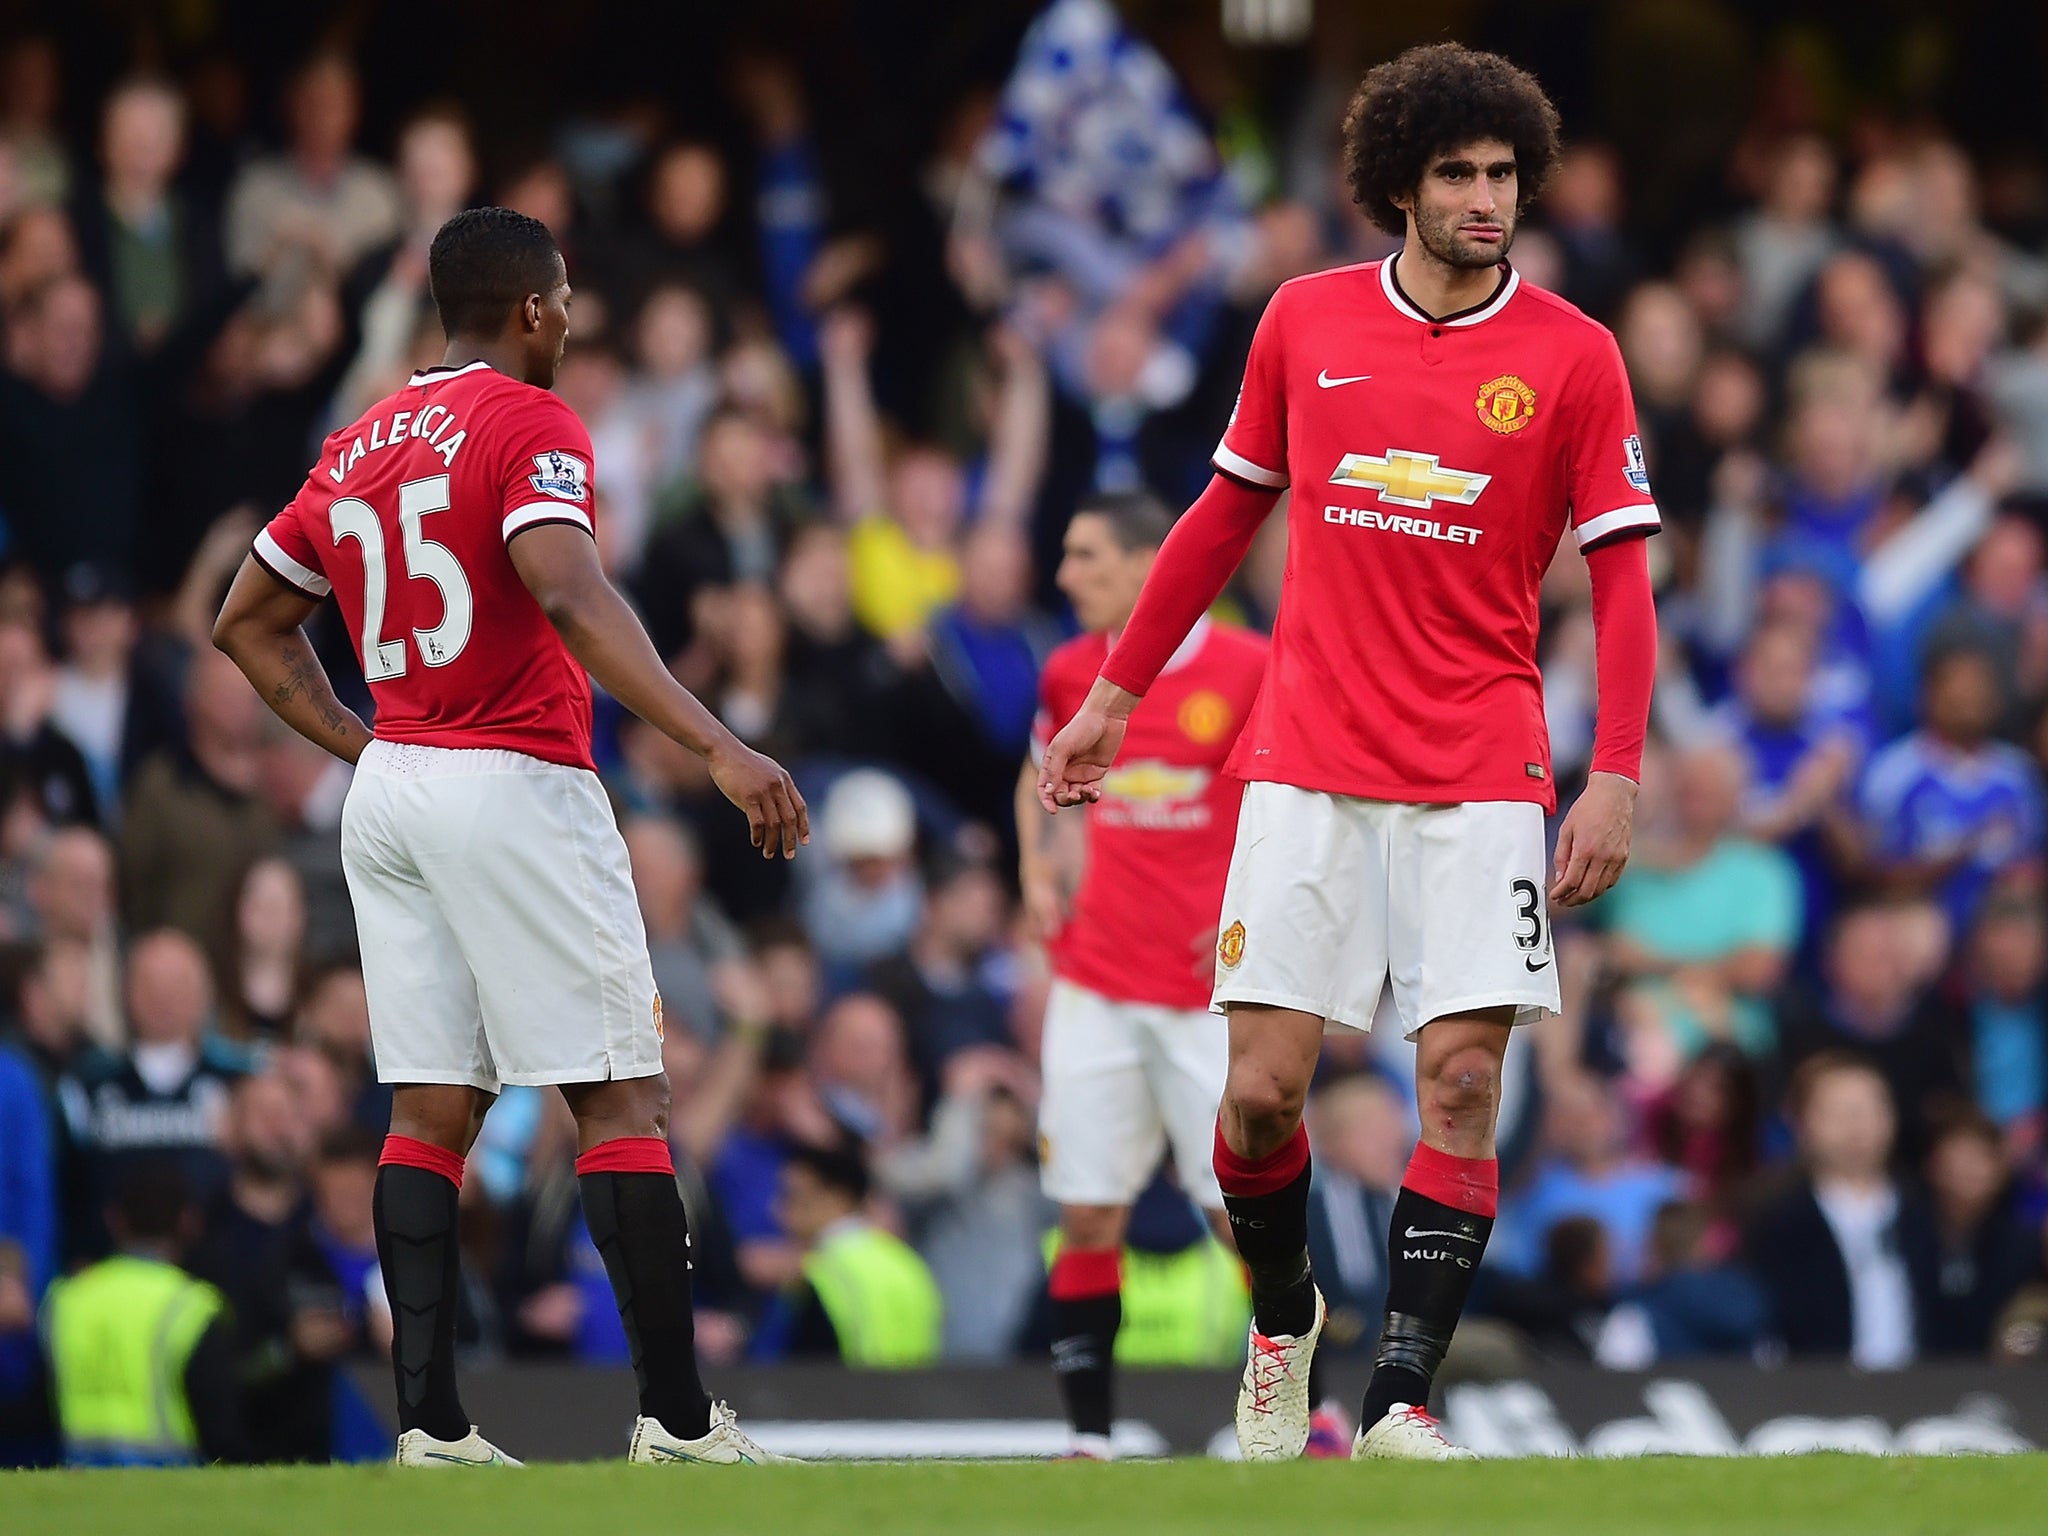 Marouane Fellaini and Manchester United in defeat to Chelsea